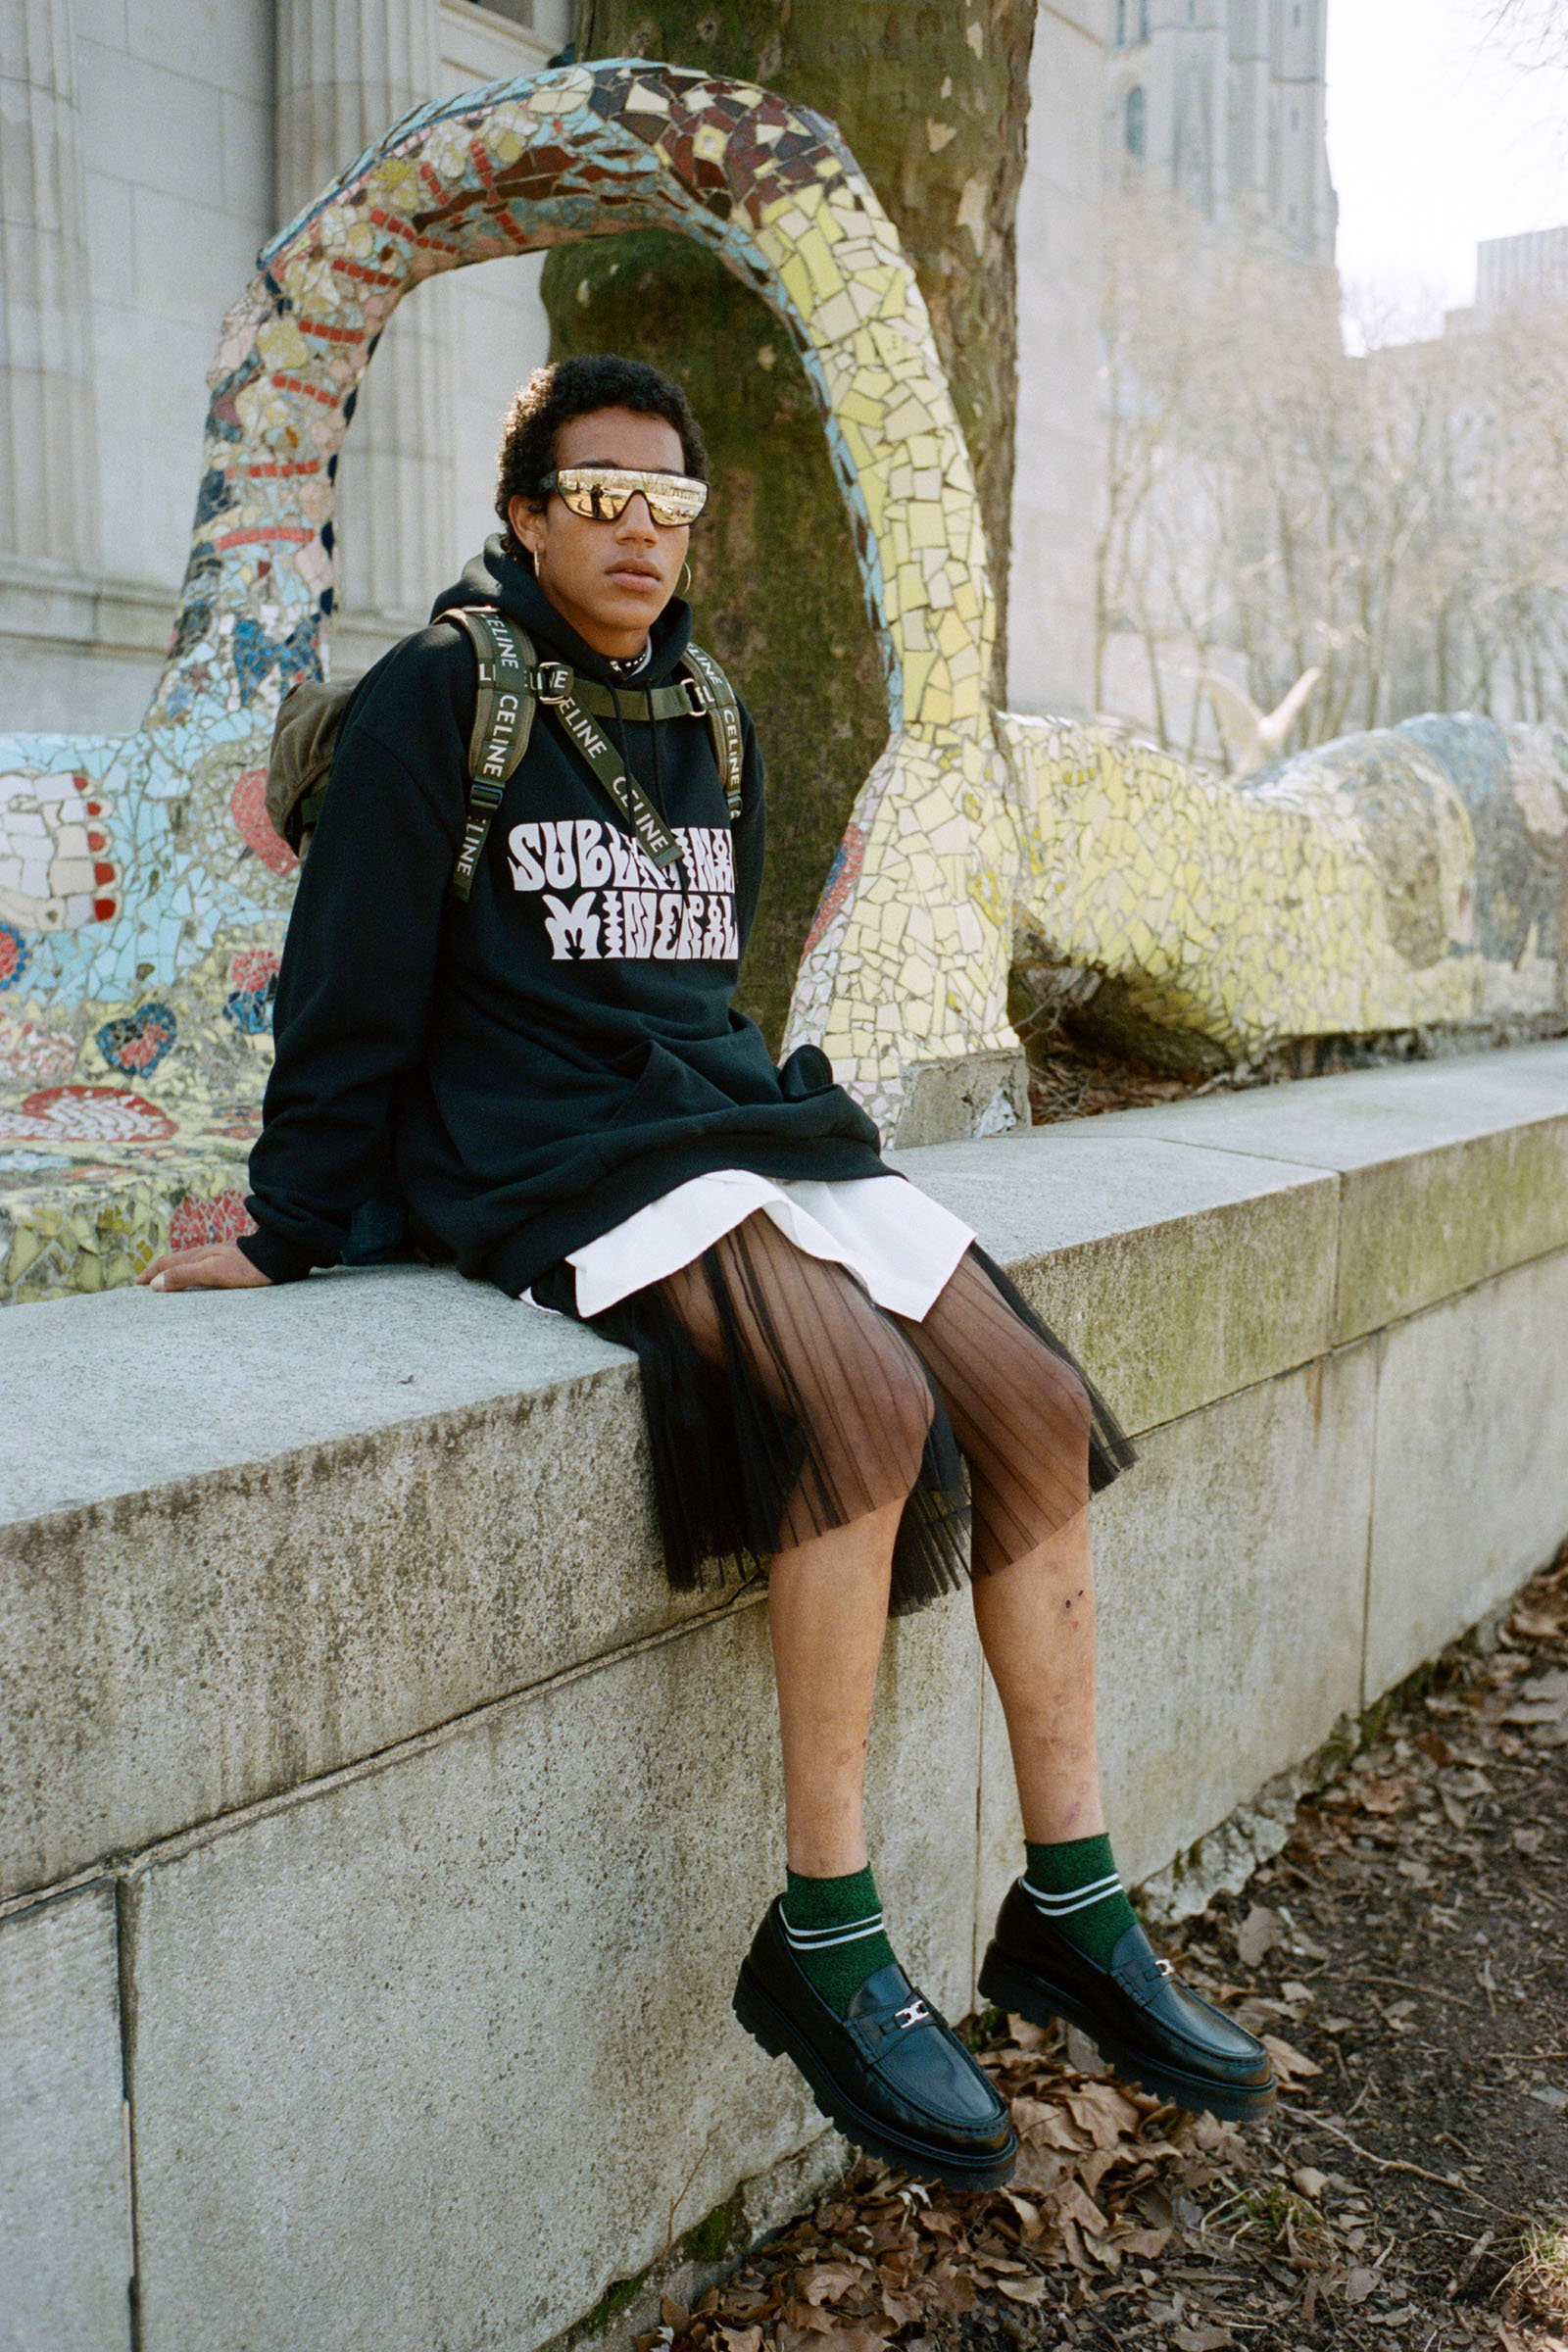 Top, skirt, hoodie, sunglasses, necklace, and shoes CELINE HOMME BY HEDI SLIMANE Trekking Backpack in Cotton Gabardine with Celine Print Khaki CELINE HOMME BY HEDI SLIMANE Earrings and socks MYLES’S OWN